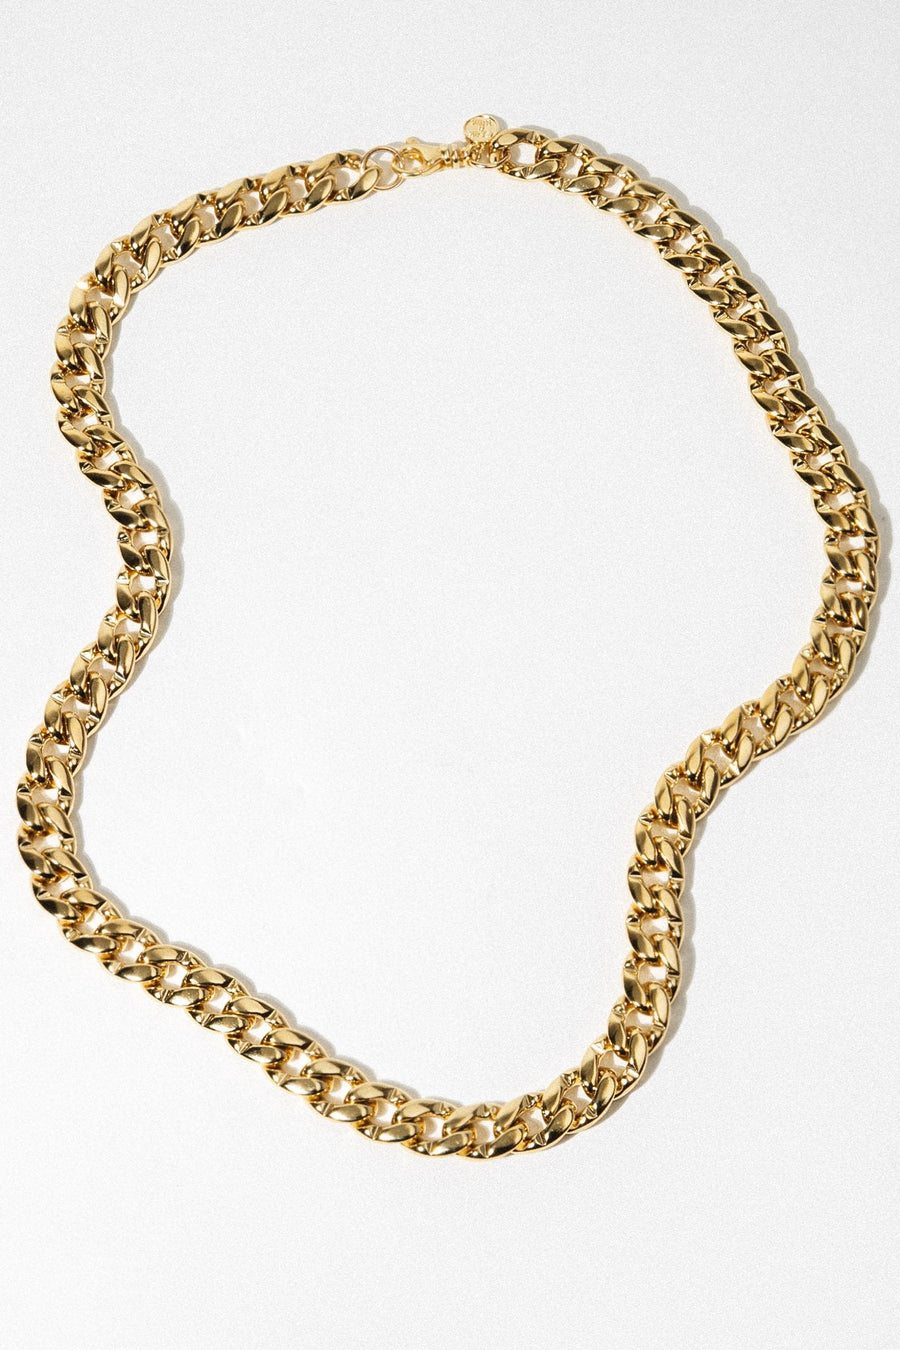 Goddess Jewelry Gold / 22 Inches Bronco Necklace